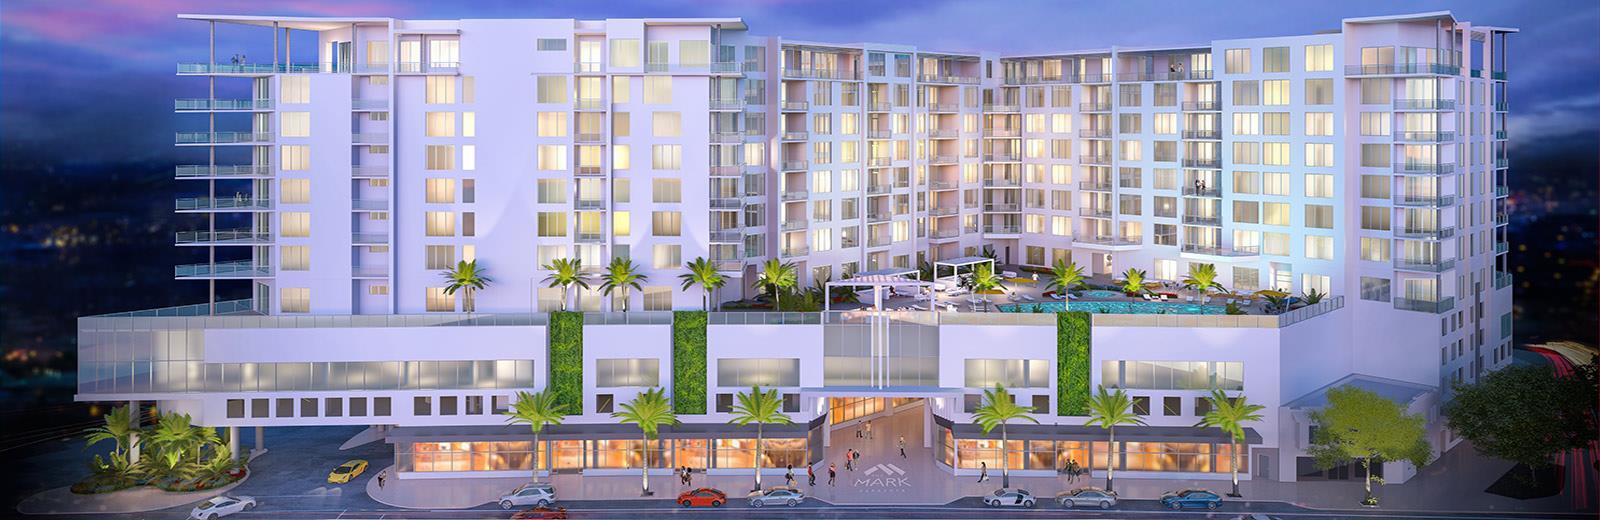 The 157-unit The Mark from developer The Kolter Group represents a new wave of condo development in Sarasota